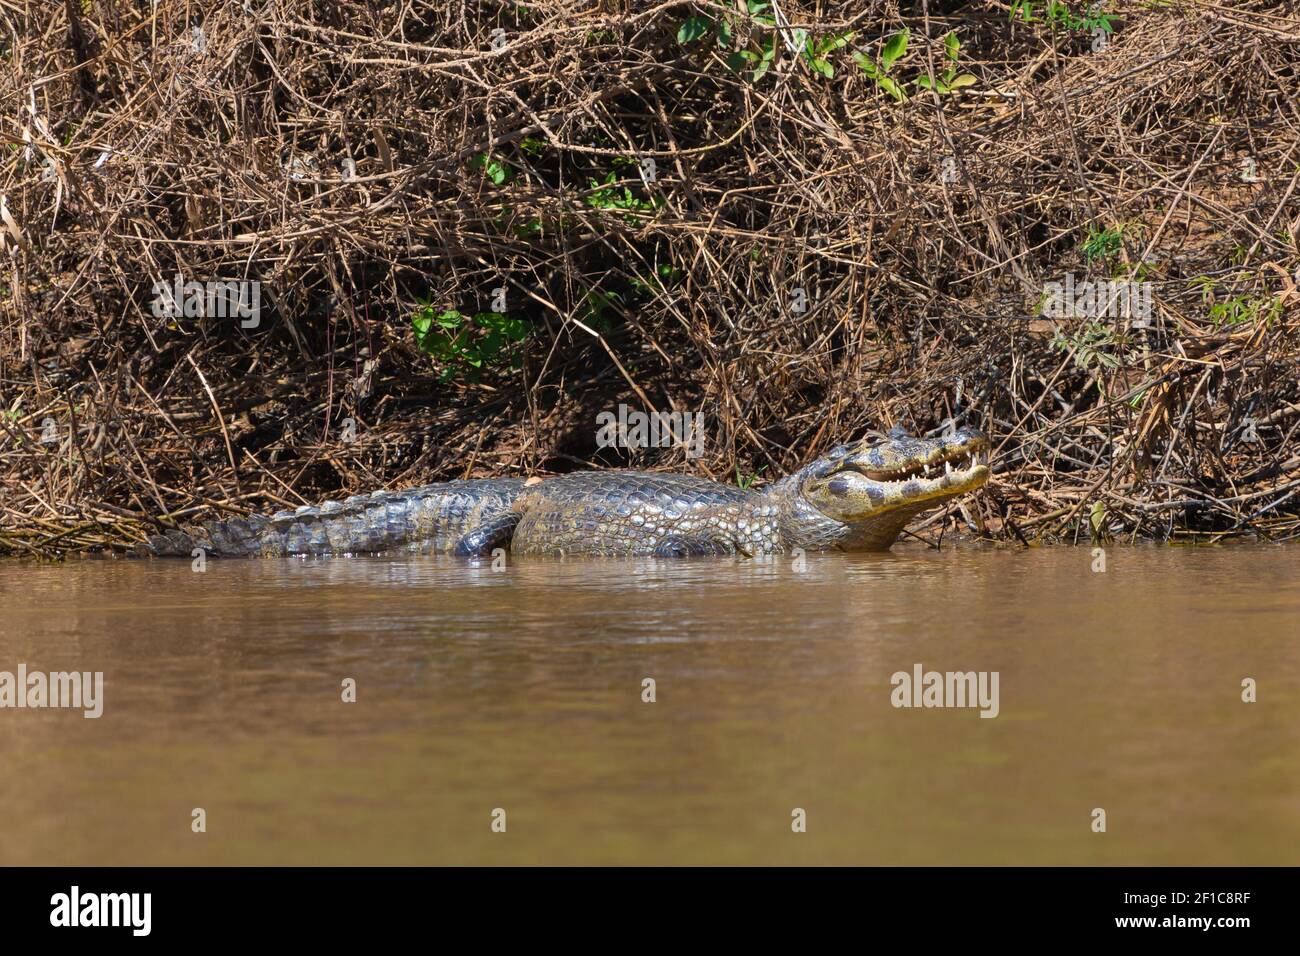 Caiman con spectacled meridionale nel Pantanal settentrionale in Mato Grosso, Brasile Foto Stock